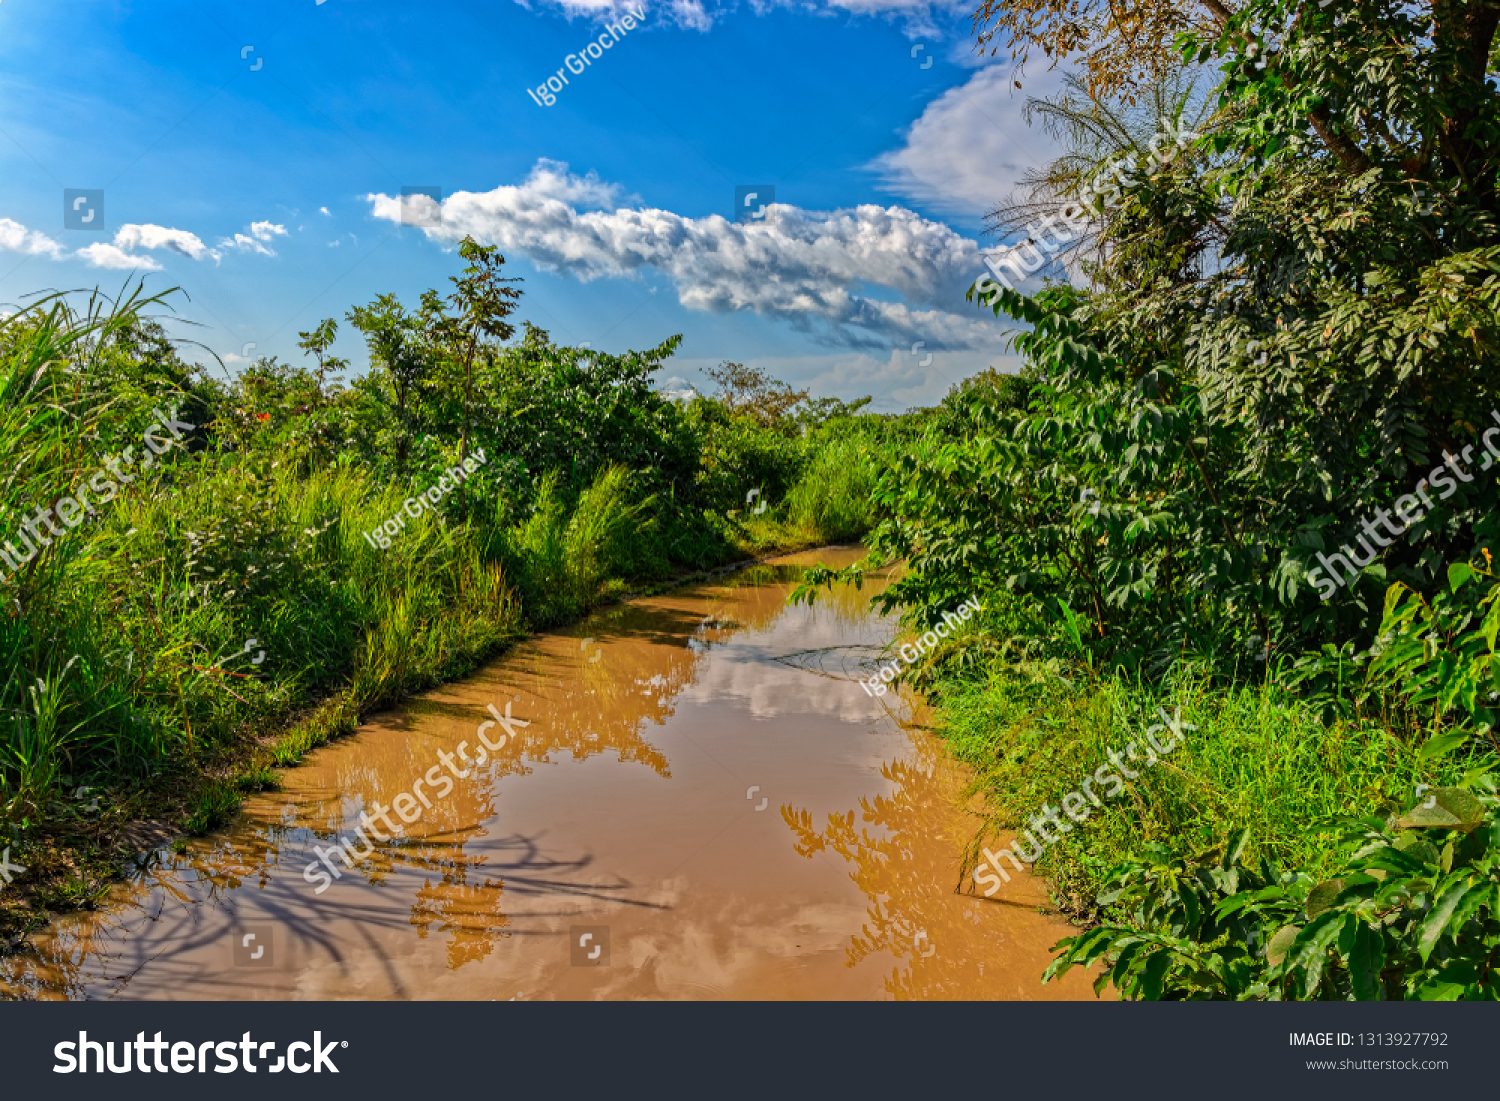 Typical unpaved rough rain-flooded road in woodland in Guinea countryside, West Africa. #1313927792